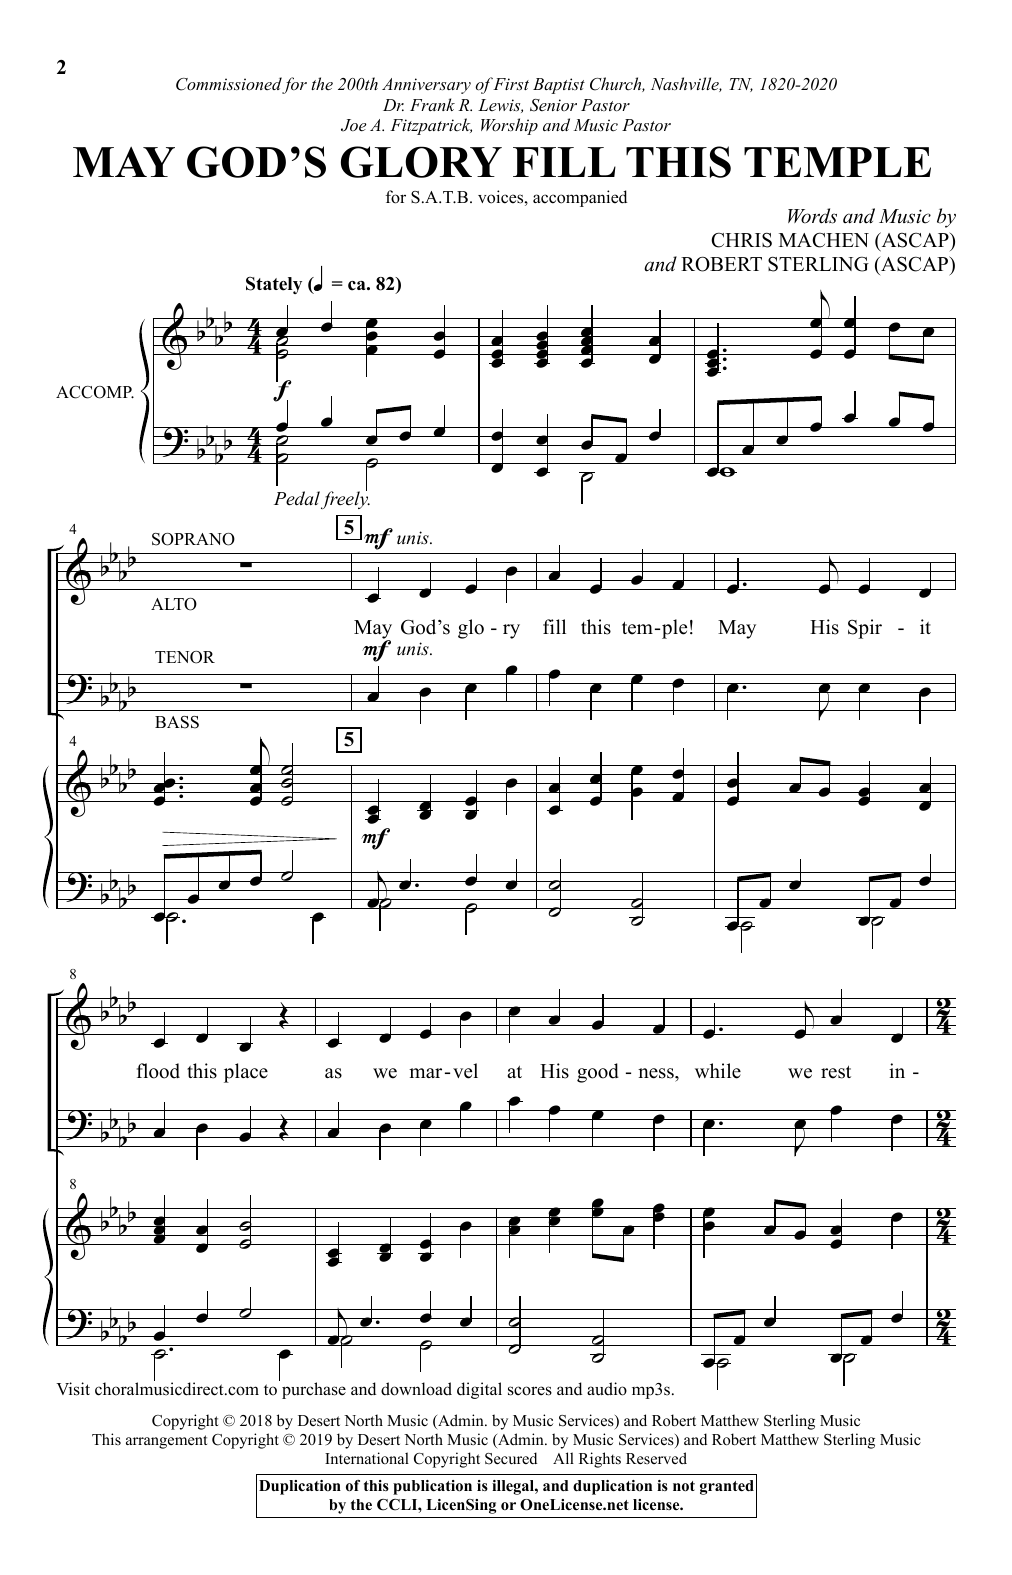 Download Robert Sterling May God's Glory Fill This Temple Sheet Music